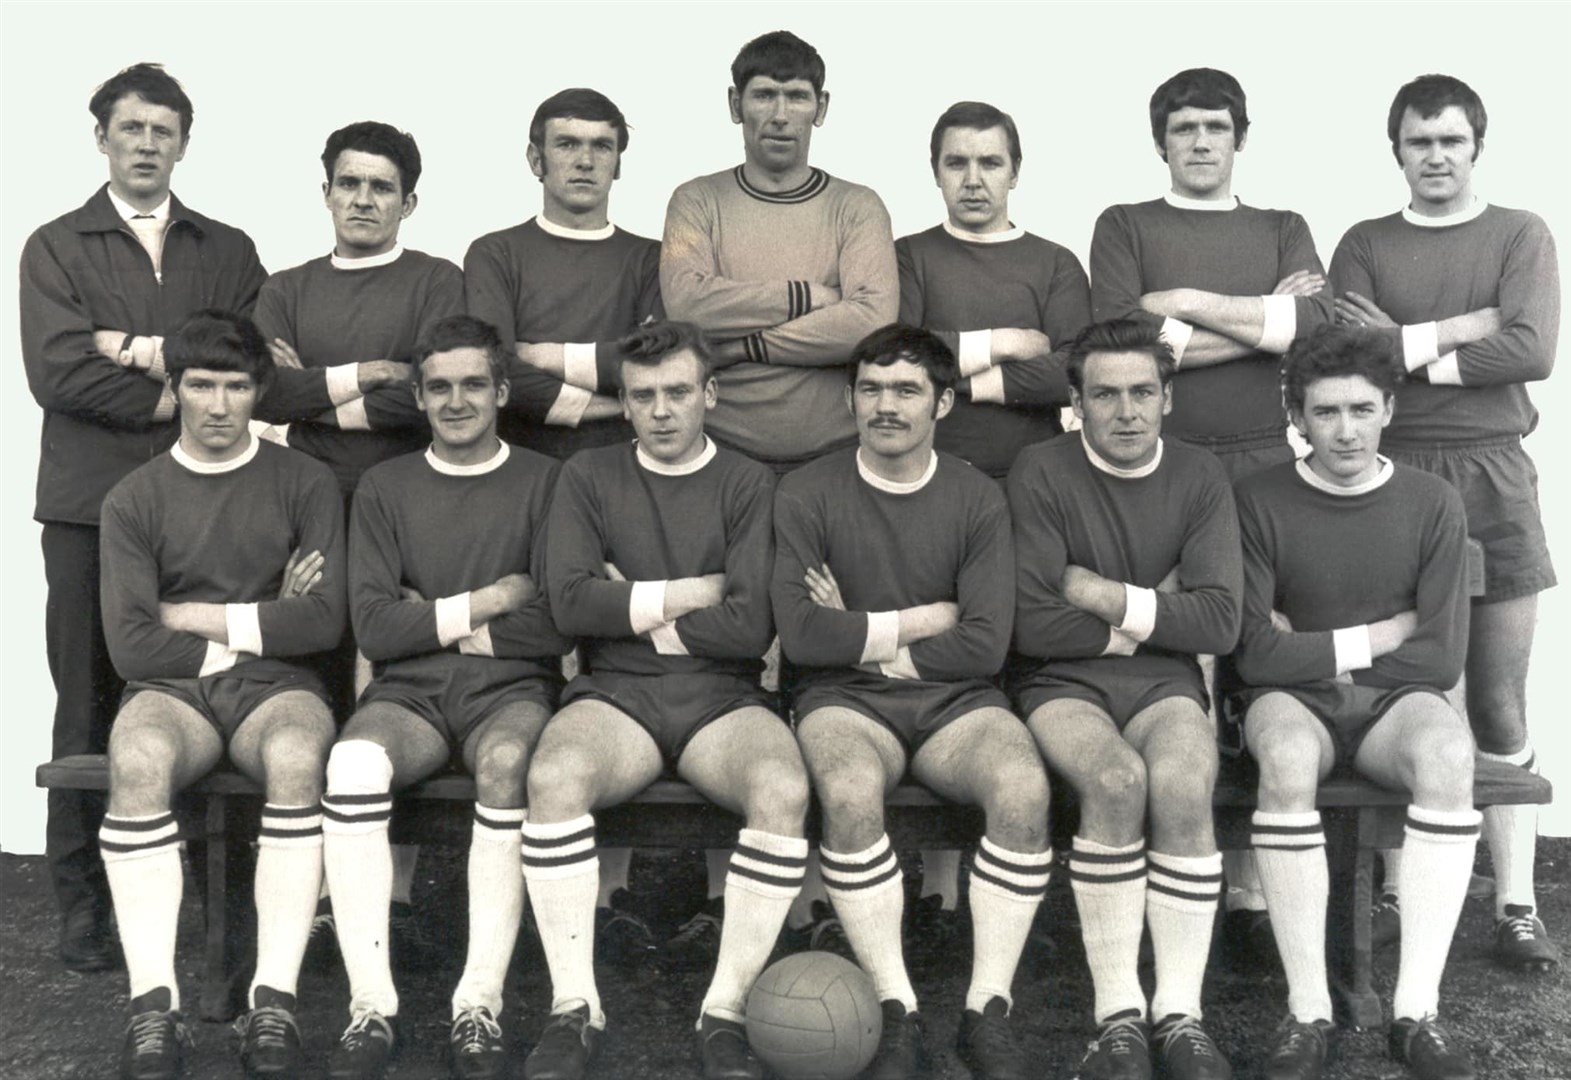 Bonar Bridge football club pictured before a friendly match against Inverness Thistle in 1970. Photo: Ryan Maclean